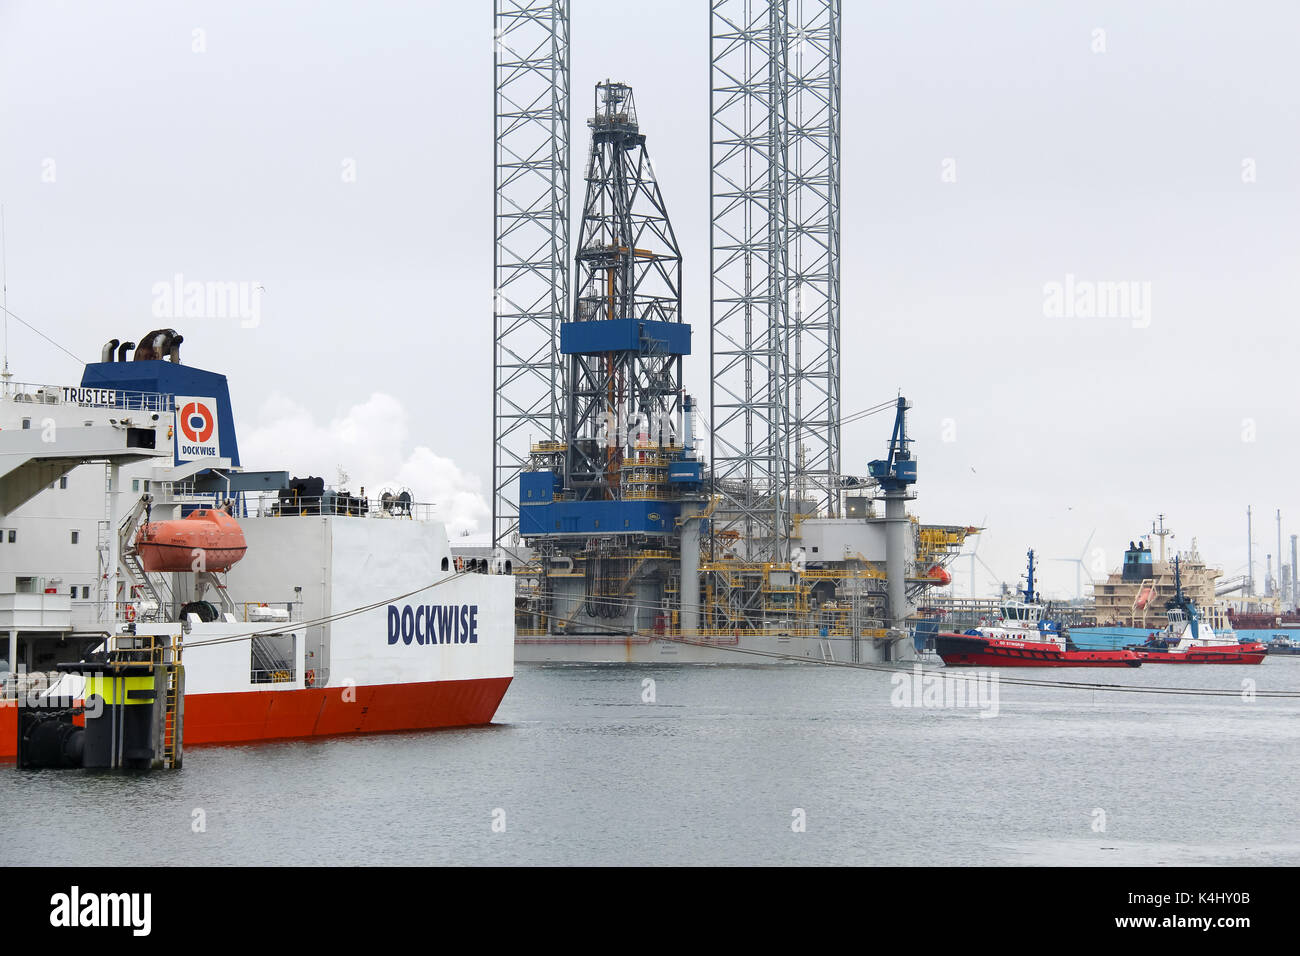 Caland Canal, Rotterdam, the Netherlands, May 29, 2014: The jack-up rig Noble Sam Turner is being being towed by Kotug tugboats Stock Photo